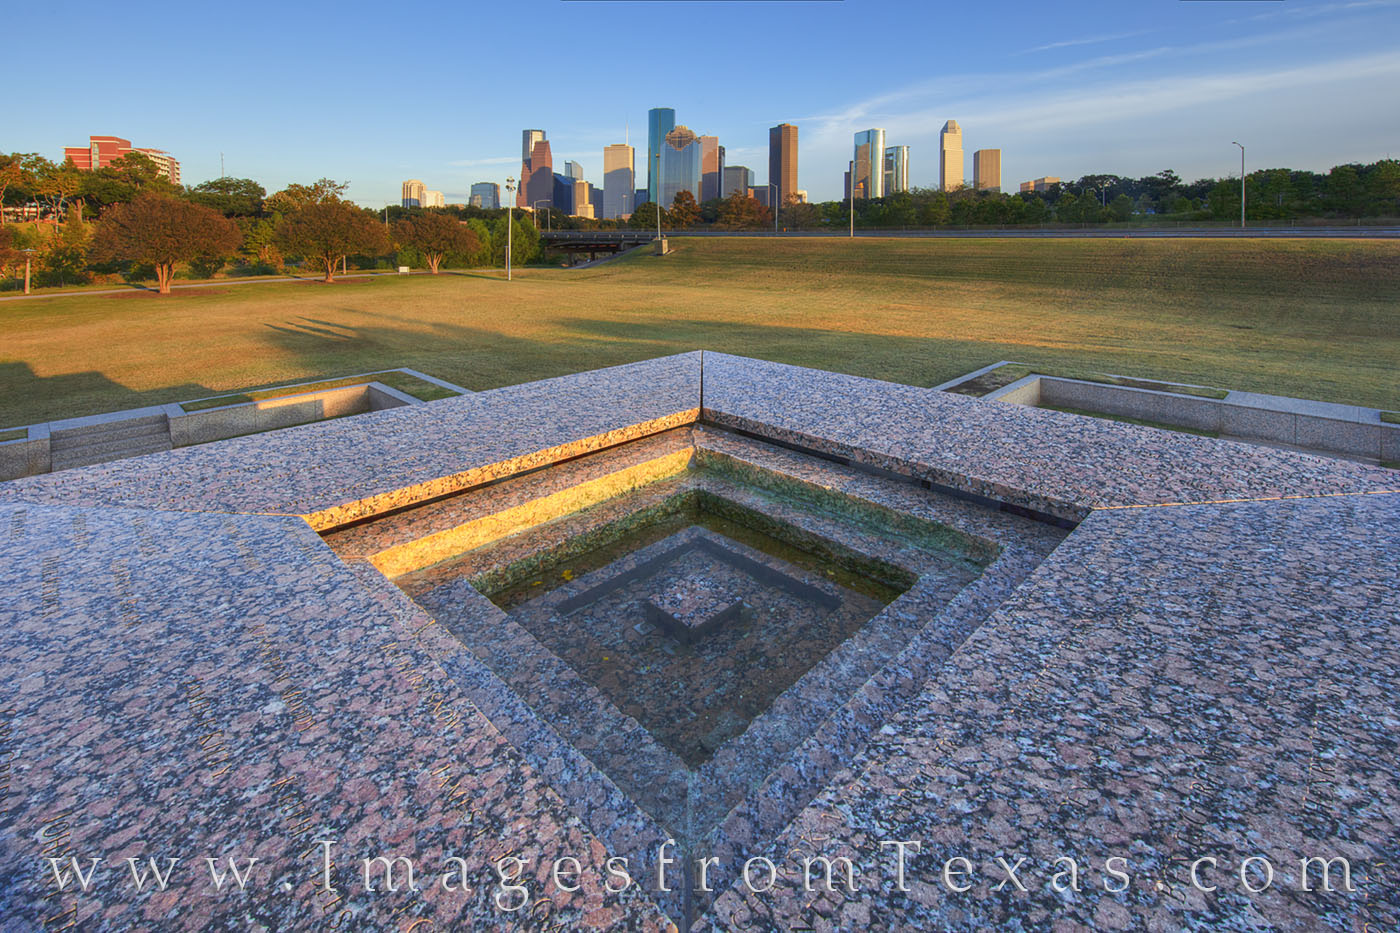 The Houston Police Memorial honors those who have sacrificed to protect the people of Houston. From the top of the memorial...